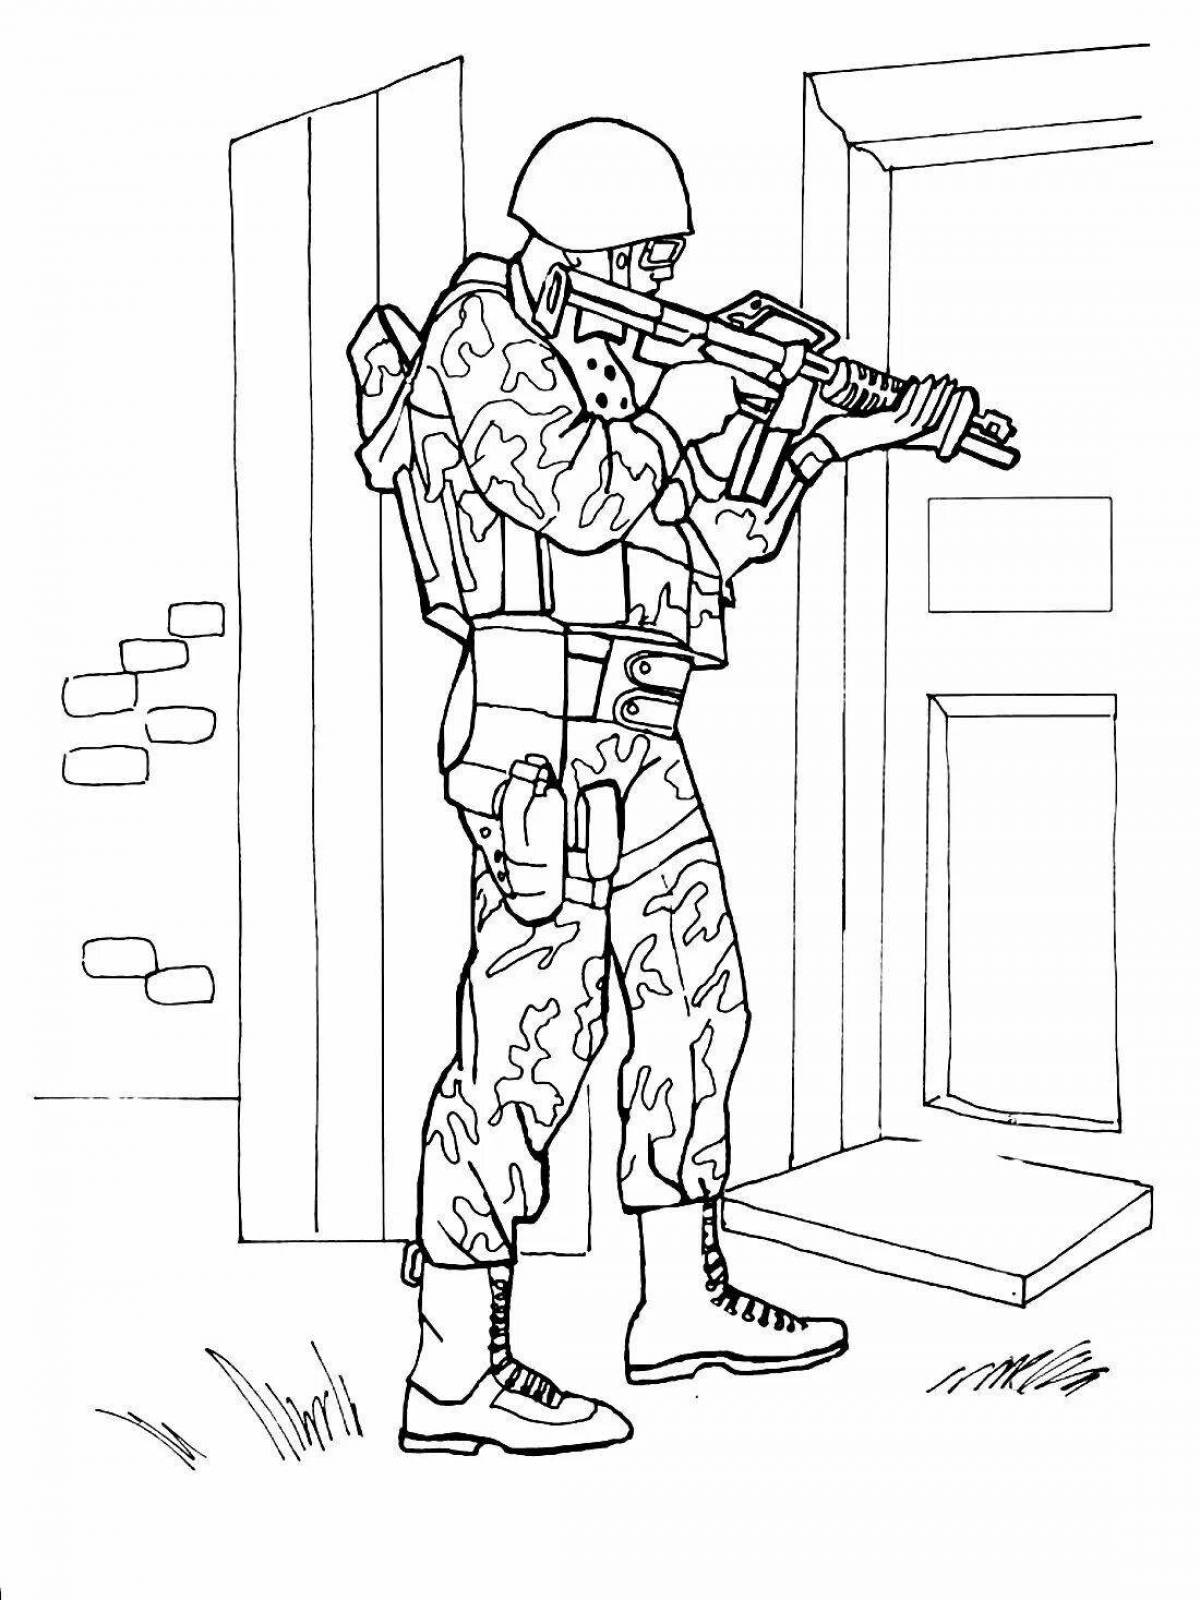 Intriguing modern soldier coloring book for kids